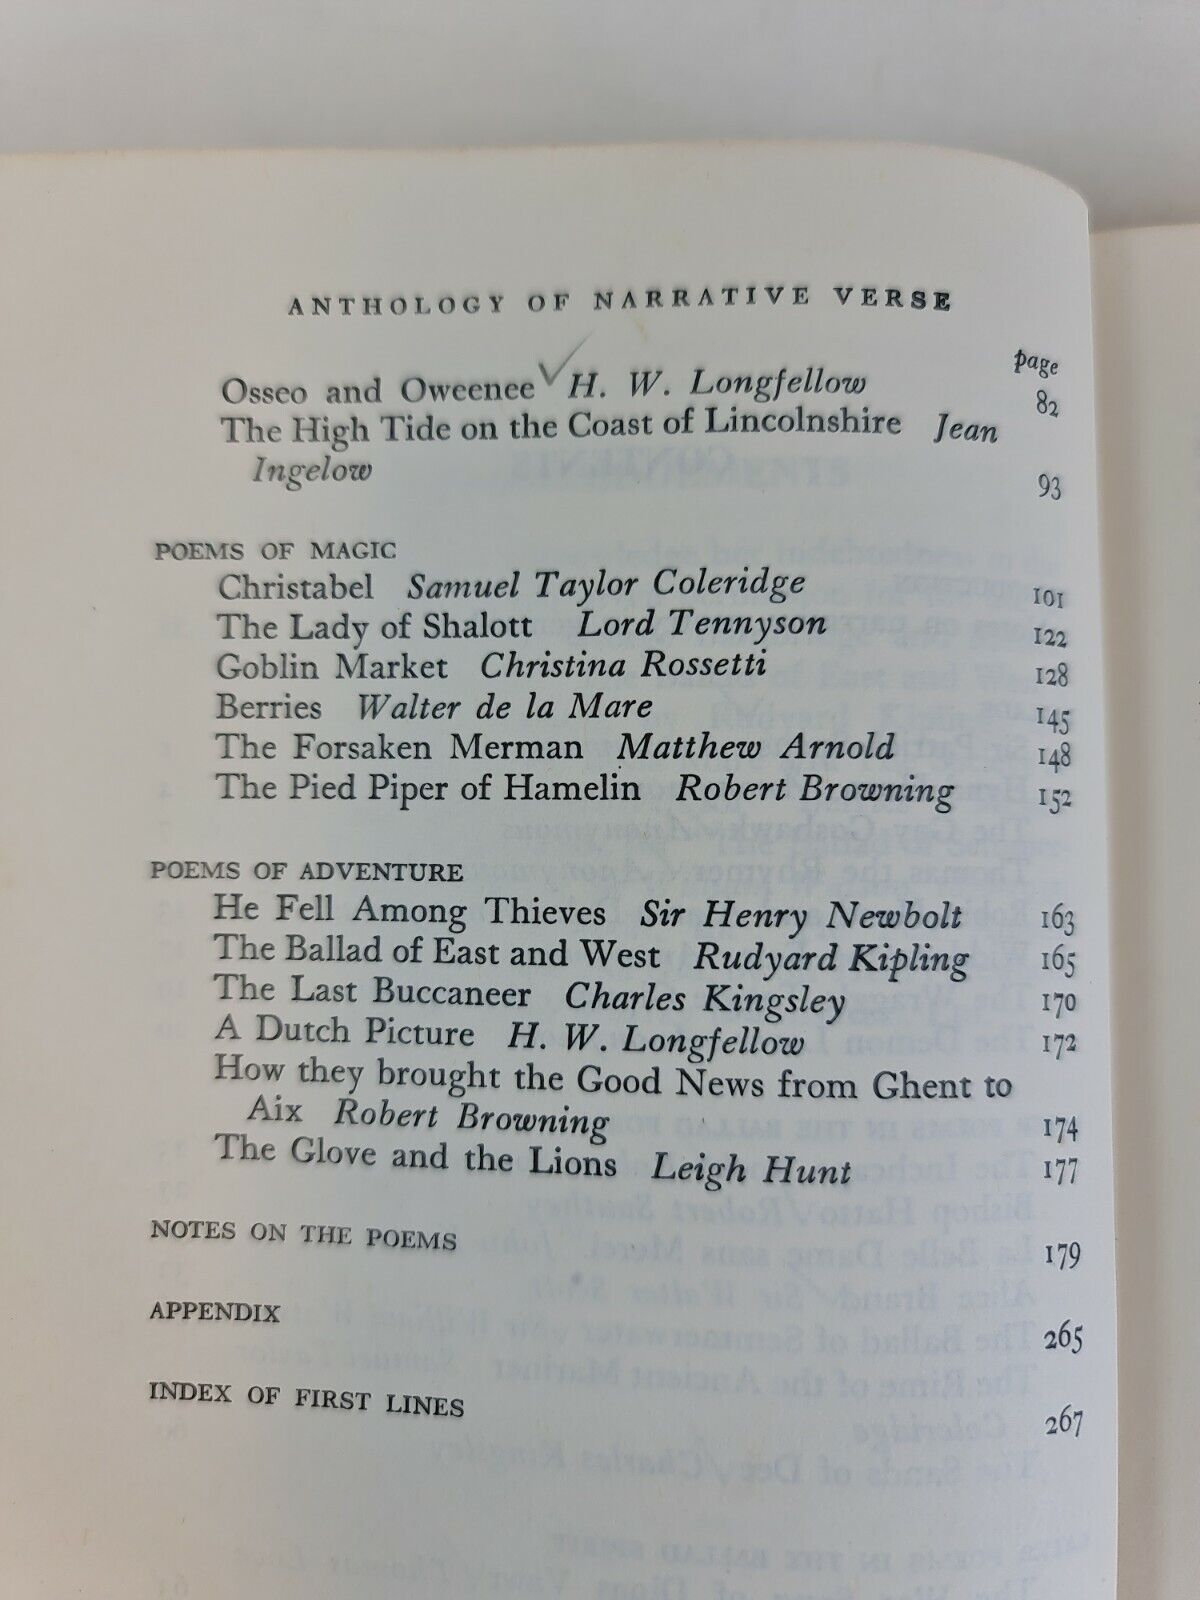 An Anthology of Narrative Verse, Book 1 by C. Rulka (1962)